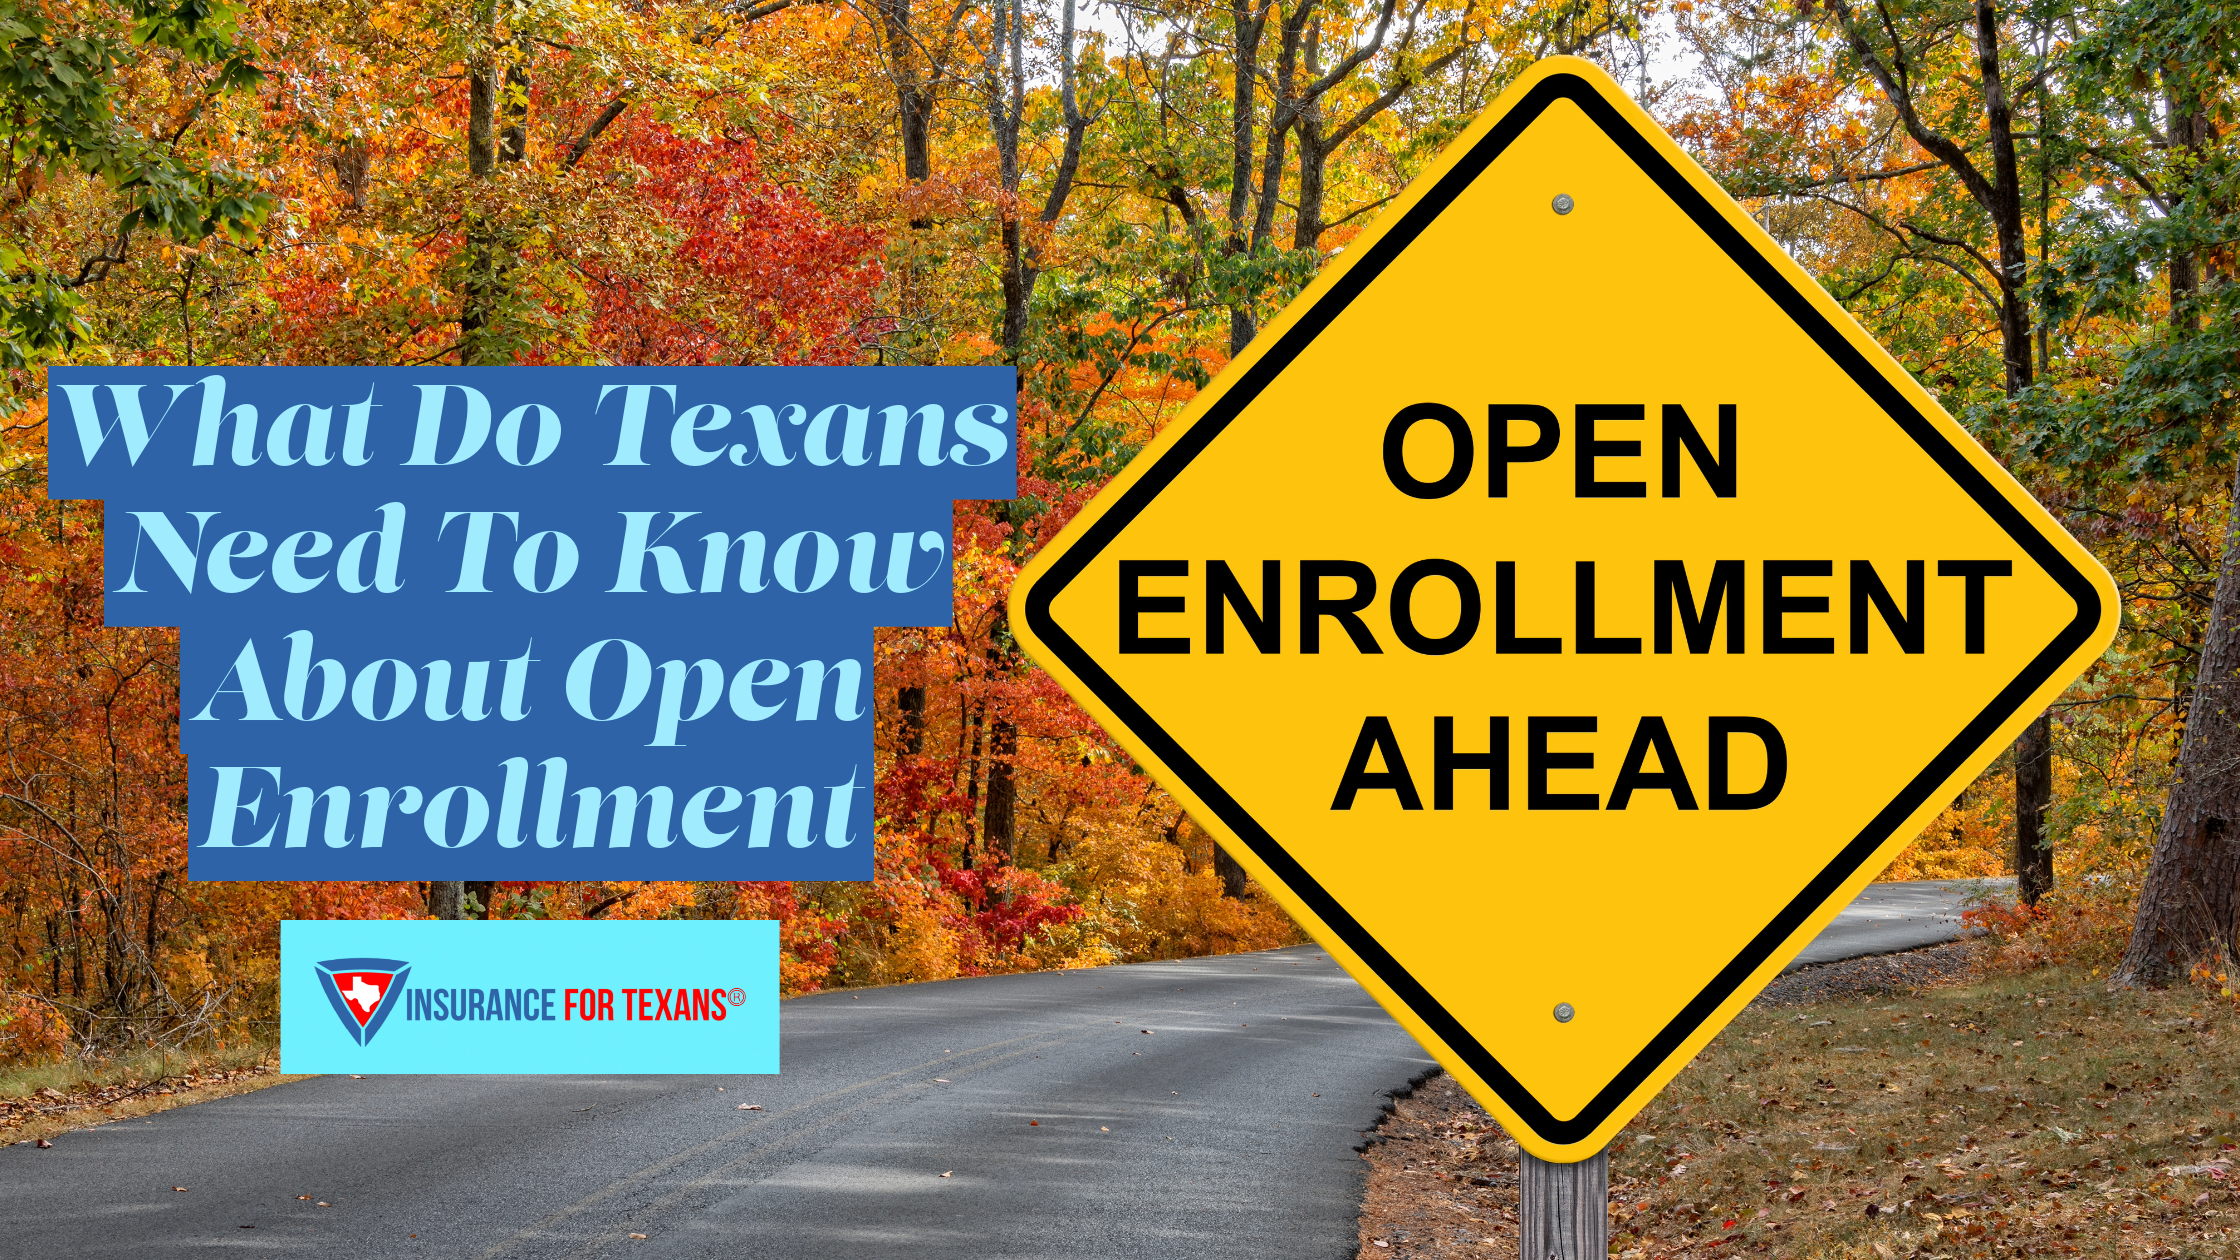 What Do Texans Need To Know About Open Enrollment